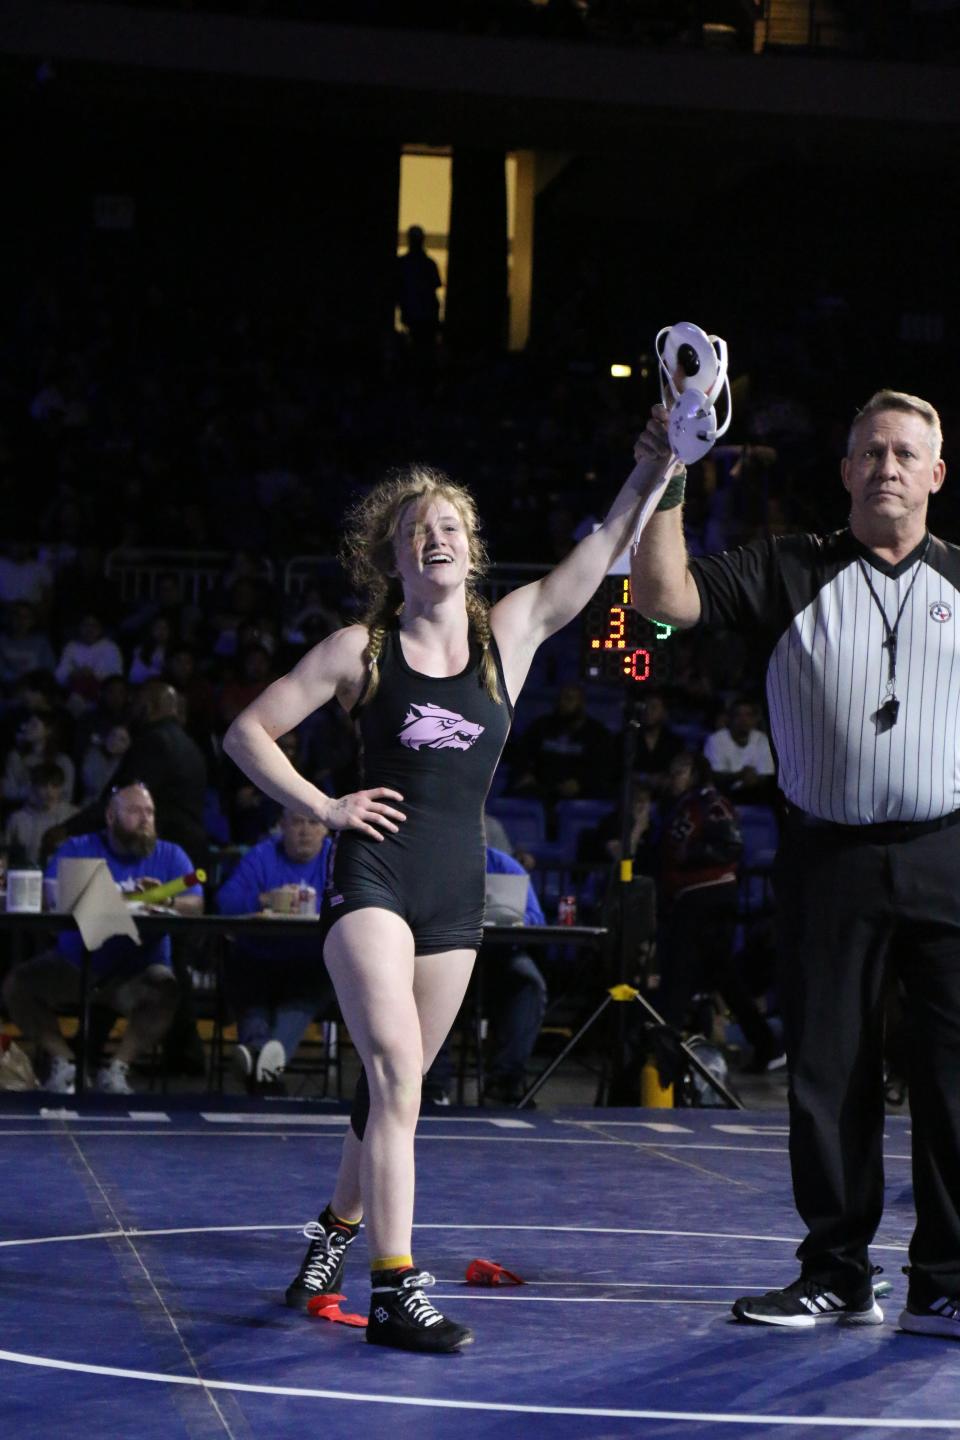 Cedar Park's Rachel Corley, in only her second year on the wrestling team, won state in the 107-pound division.